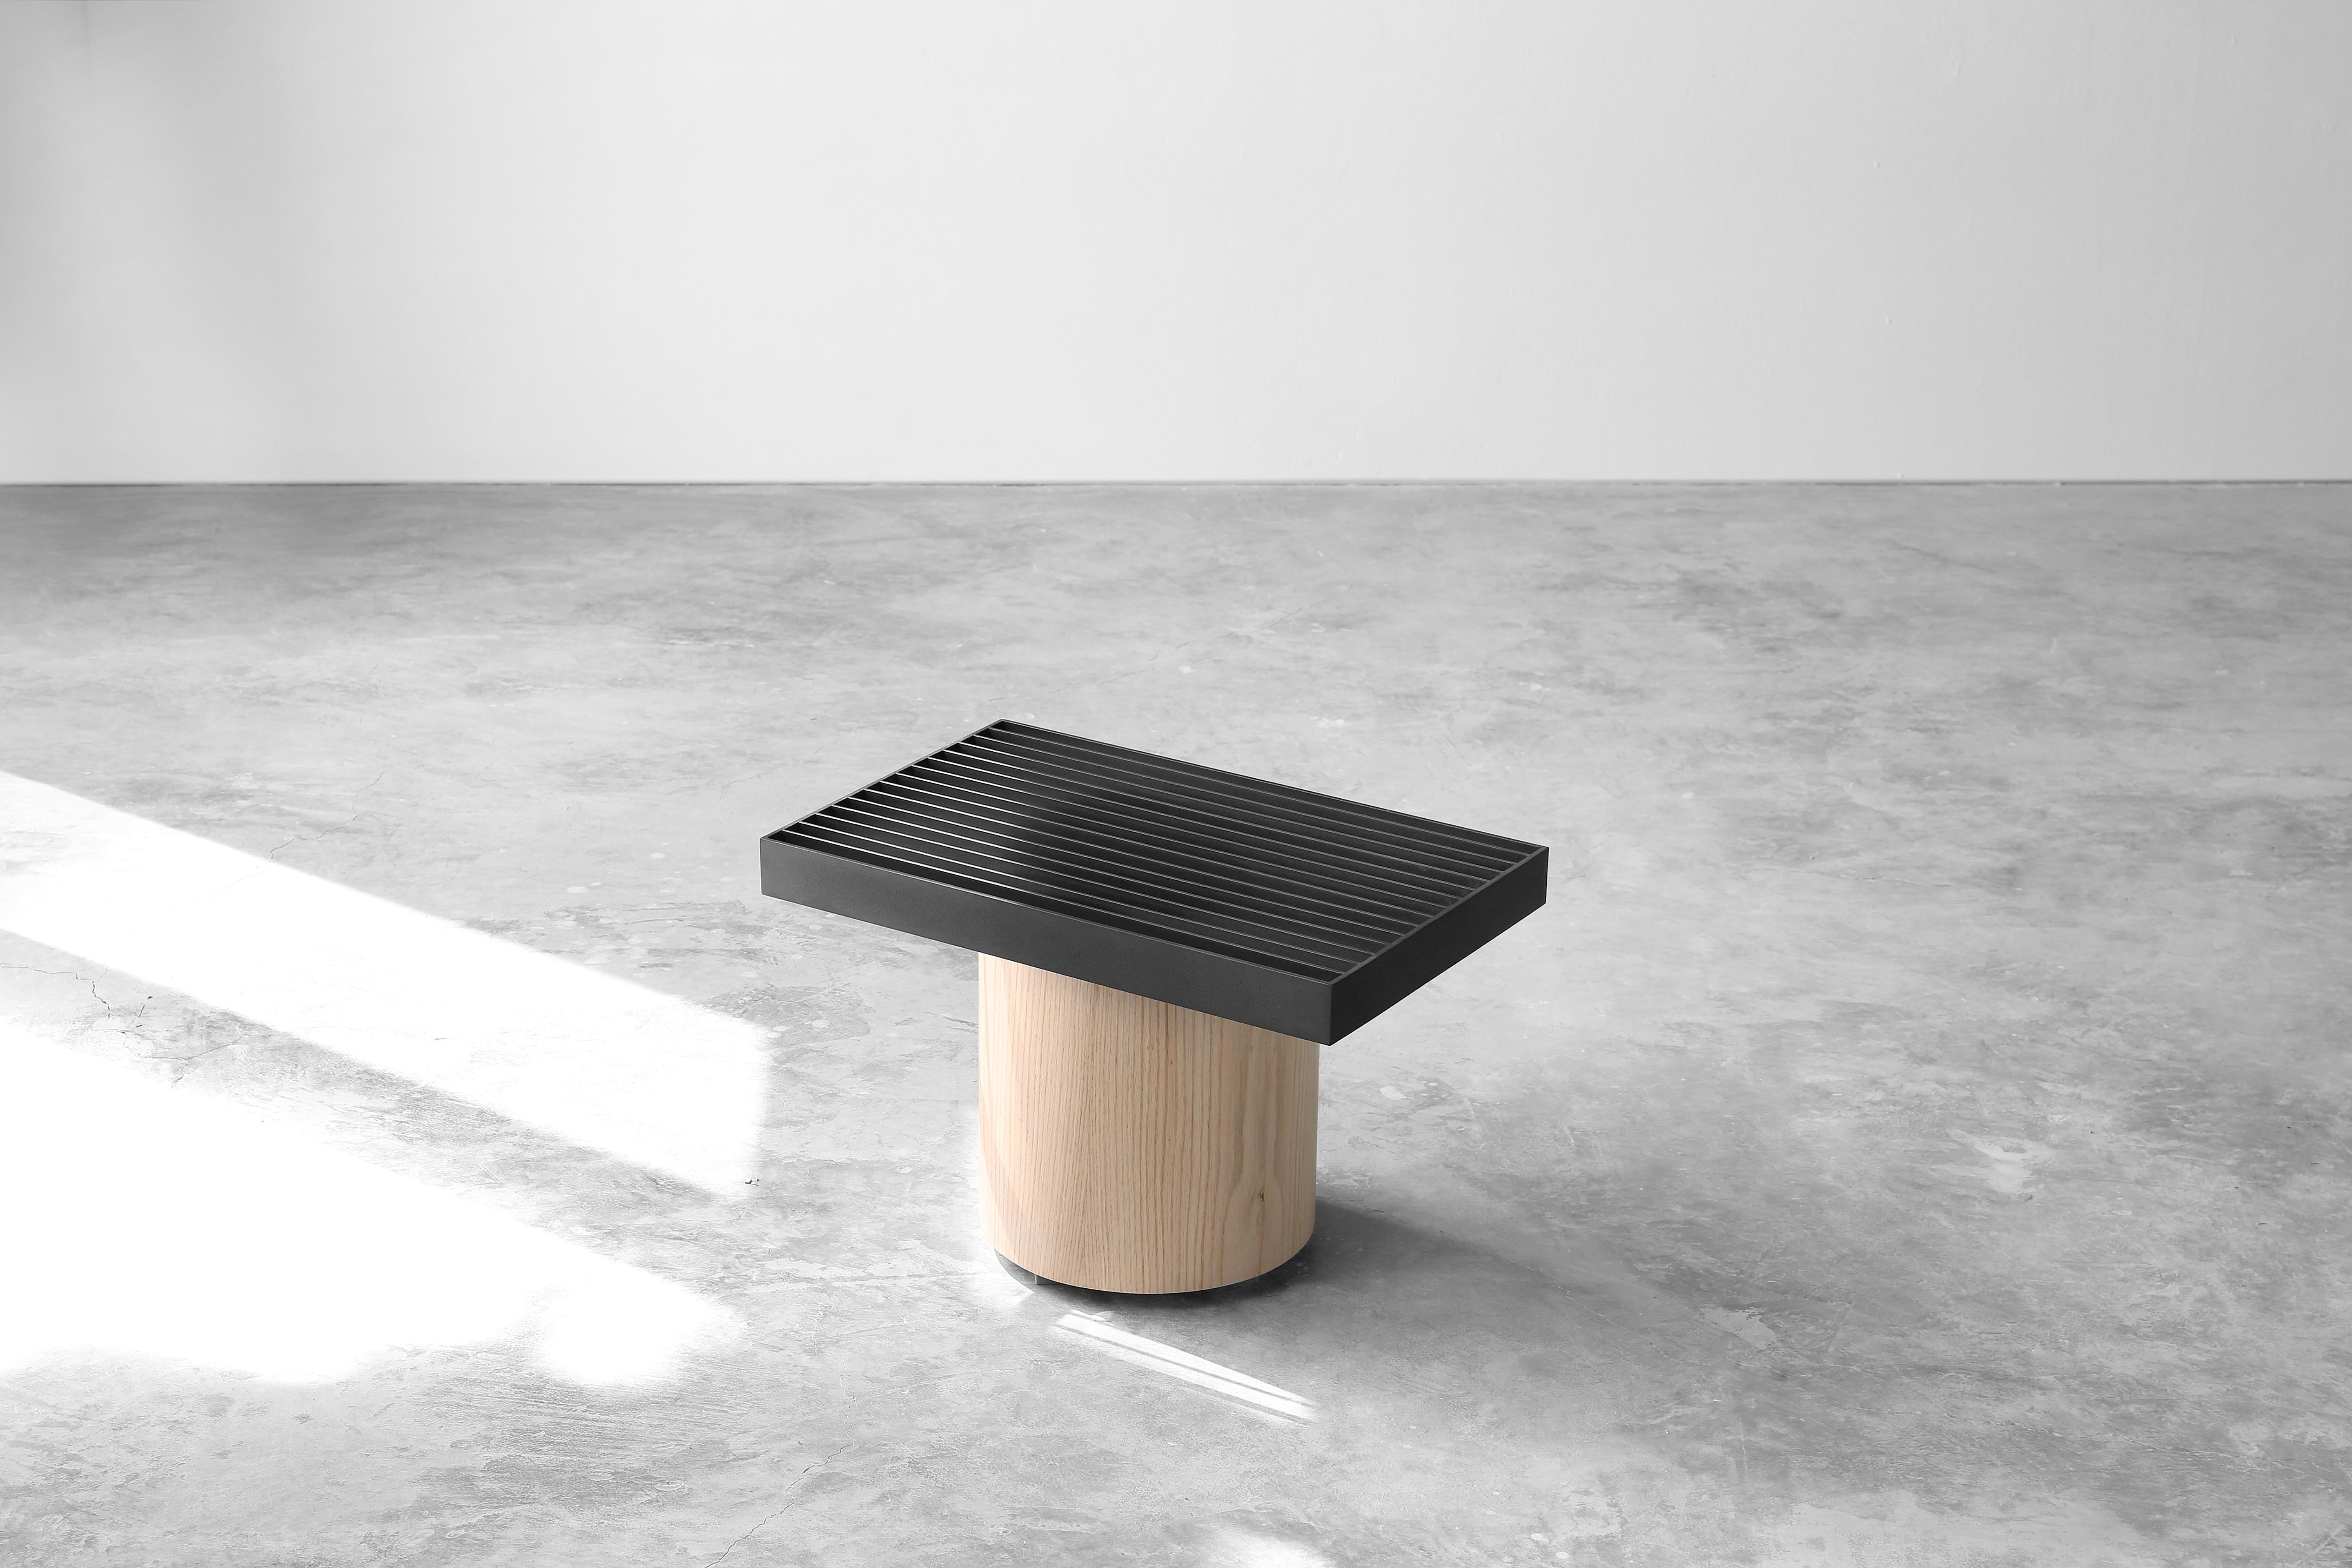 Laws of Motion Small Side Table, Night Stand in Oak and Metal Finish

Laws of Motion is a furniture collection that through a series of different typologies explores concepts like force, gravity and movement. Each of these functional sculptures